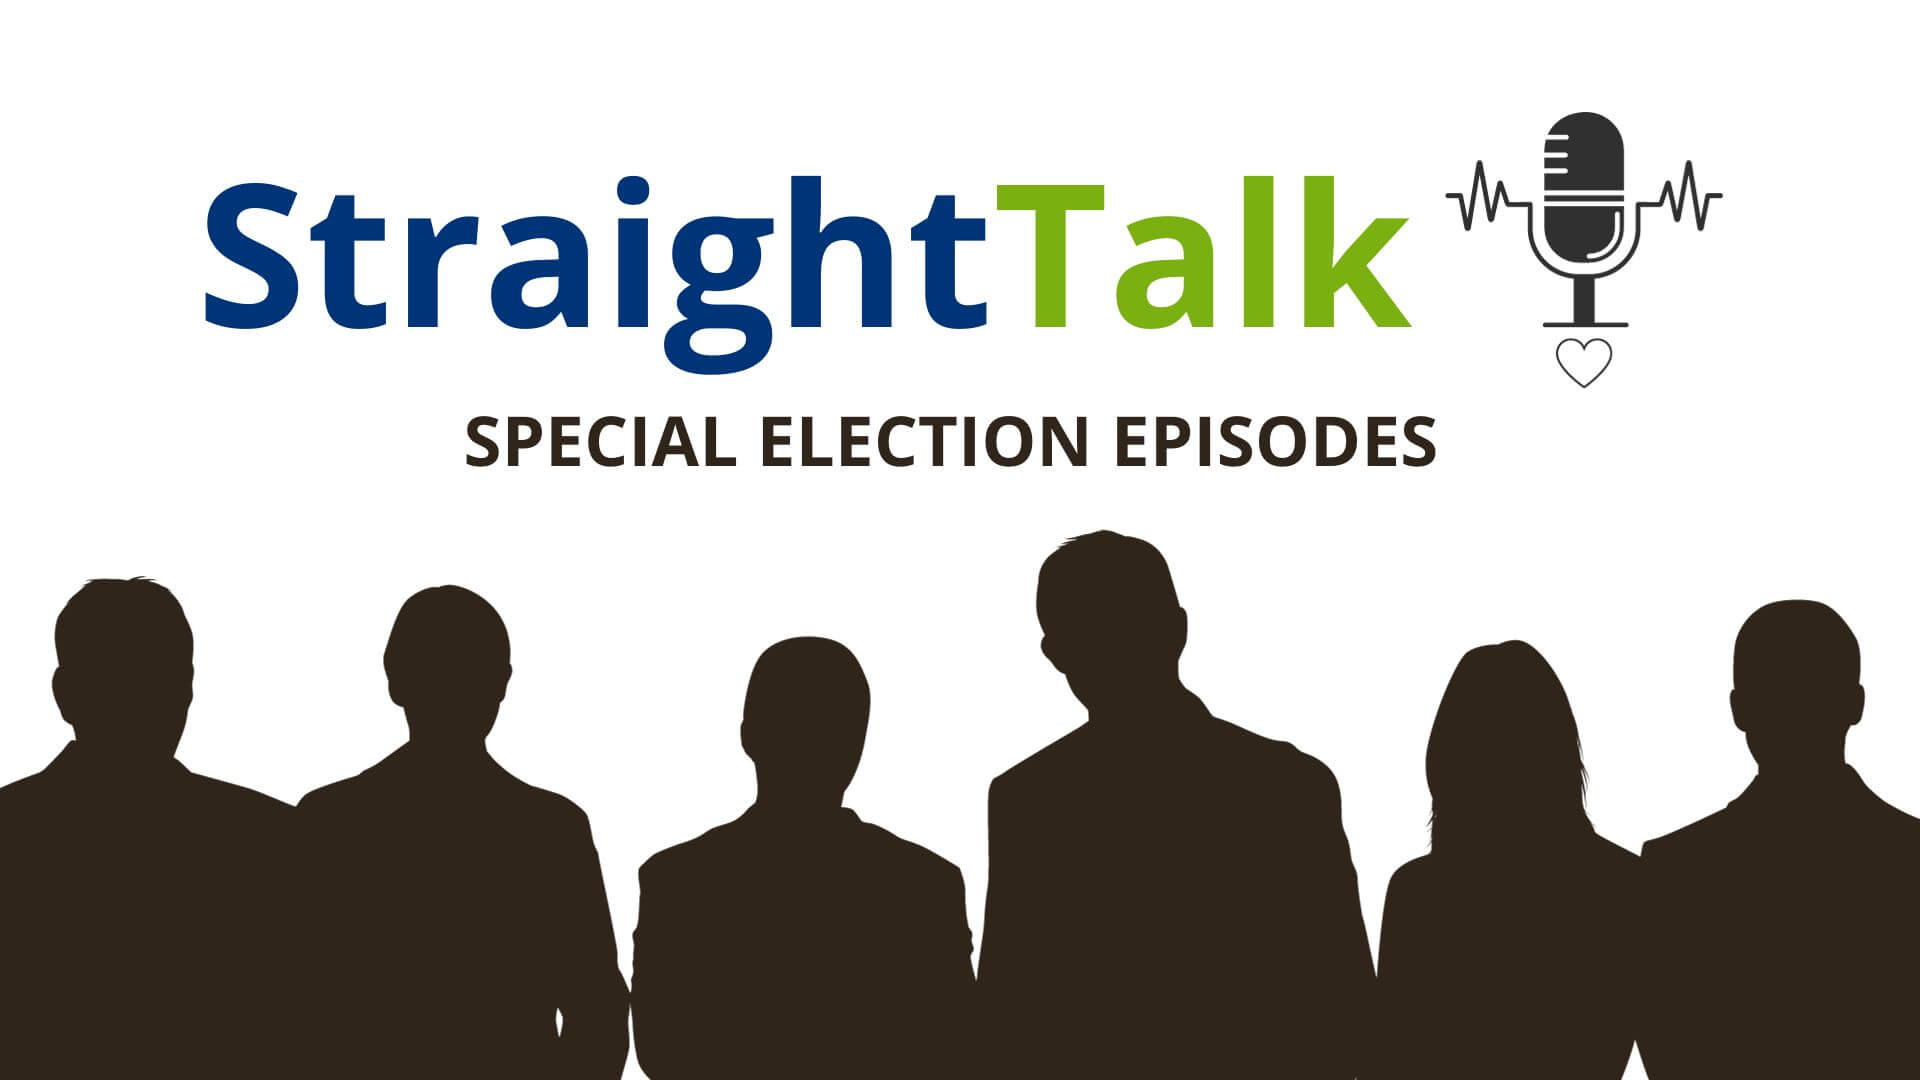 Here's our 3 Special Election Episodes of StraightTalk - Featuring NZ First leader Winston Peters, ACT leader David Seymour, and the leaders of minor conservative parties.